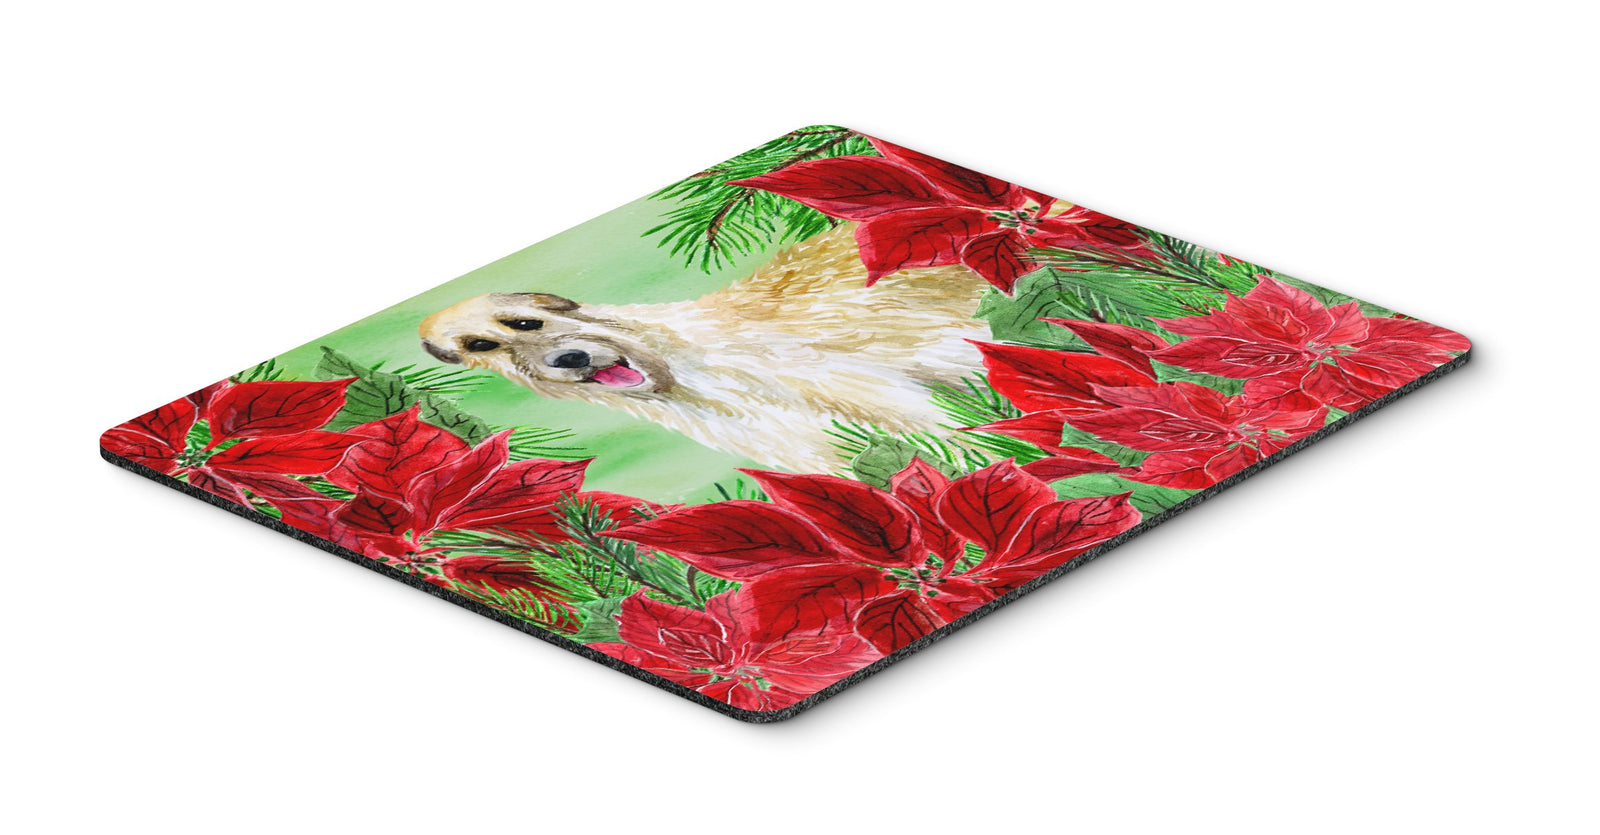 Irish Wolfhound Poinsettas Mouse Pad, Hot Pad or Trivet CK1318MP by Caroline's Treasures